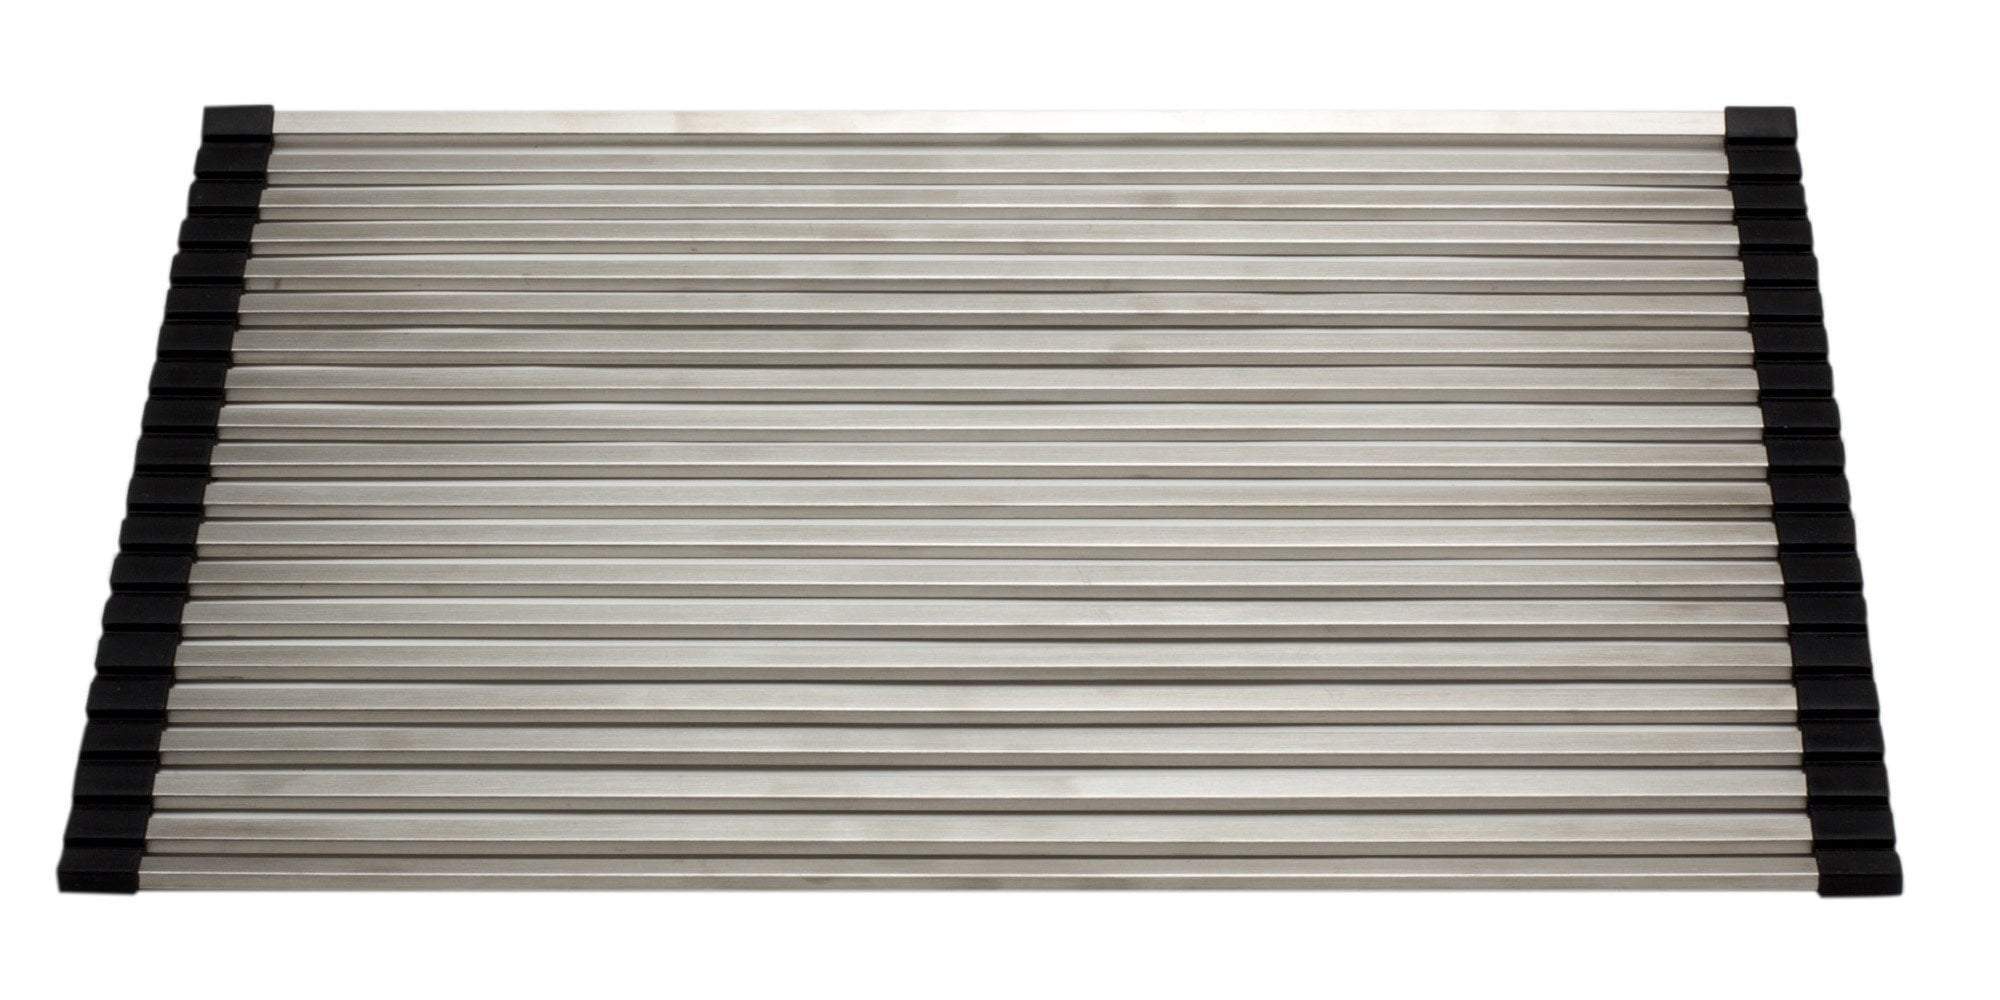 18 x 13 Modern Stainless Steel Drain Mat for Kitchen - Luxury Bath  Collection